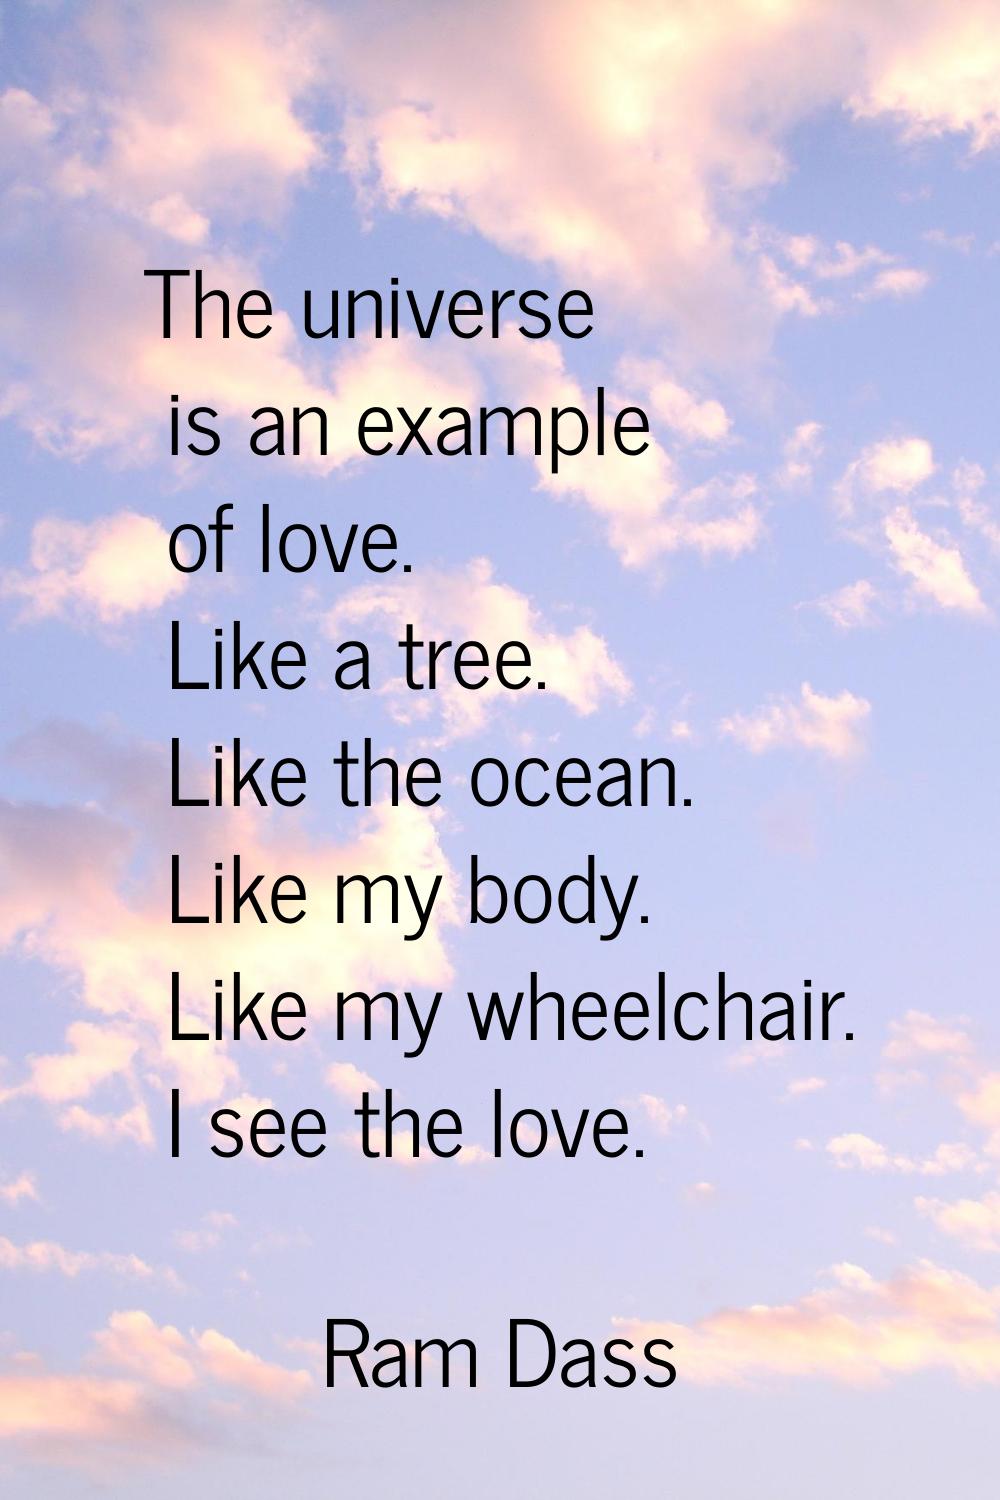 The universe is an example of love. Like a tree. Like the ocean. Like my body. Like my wheelchair. 